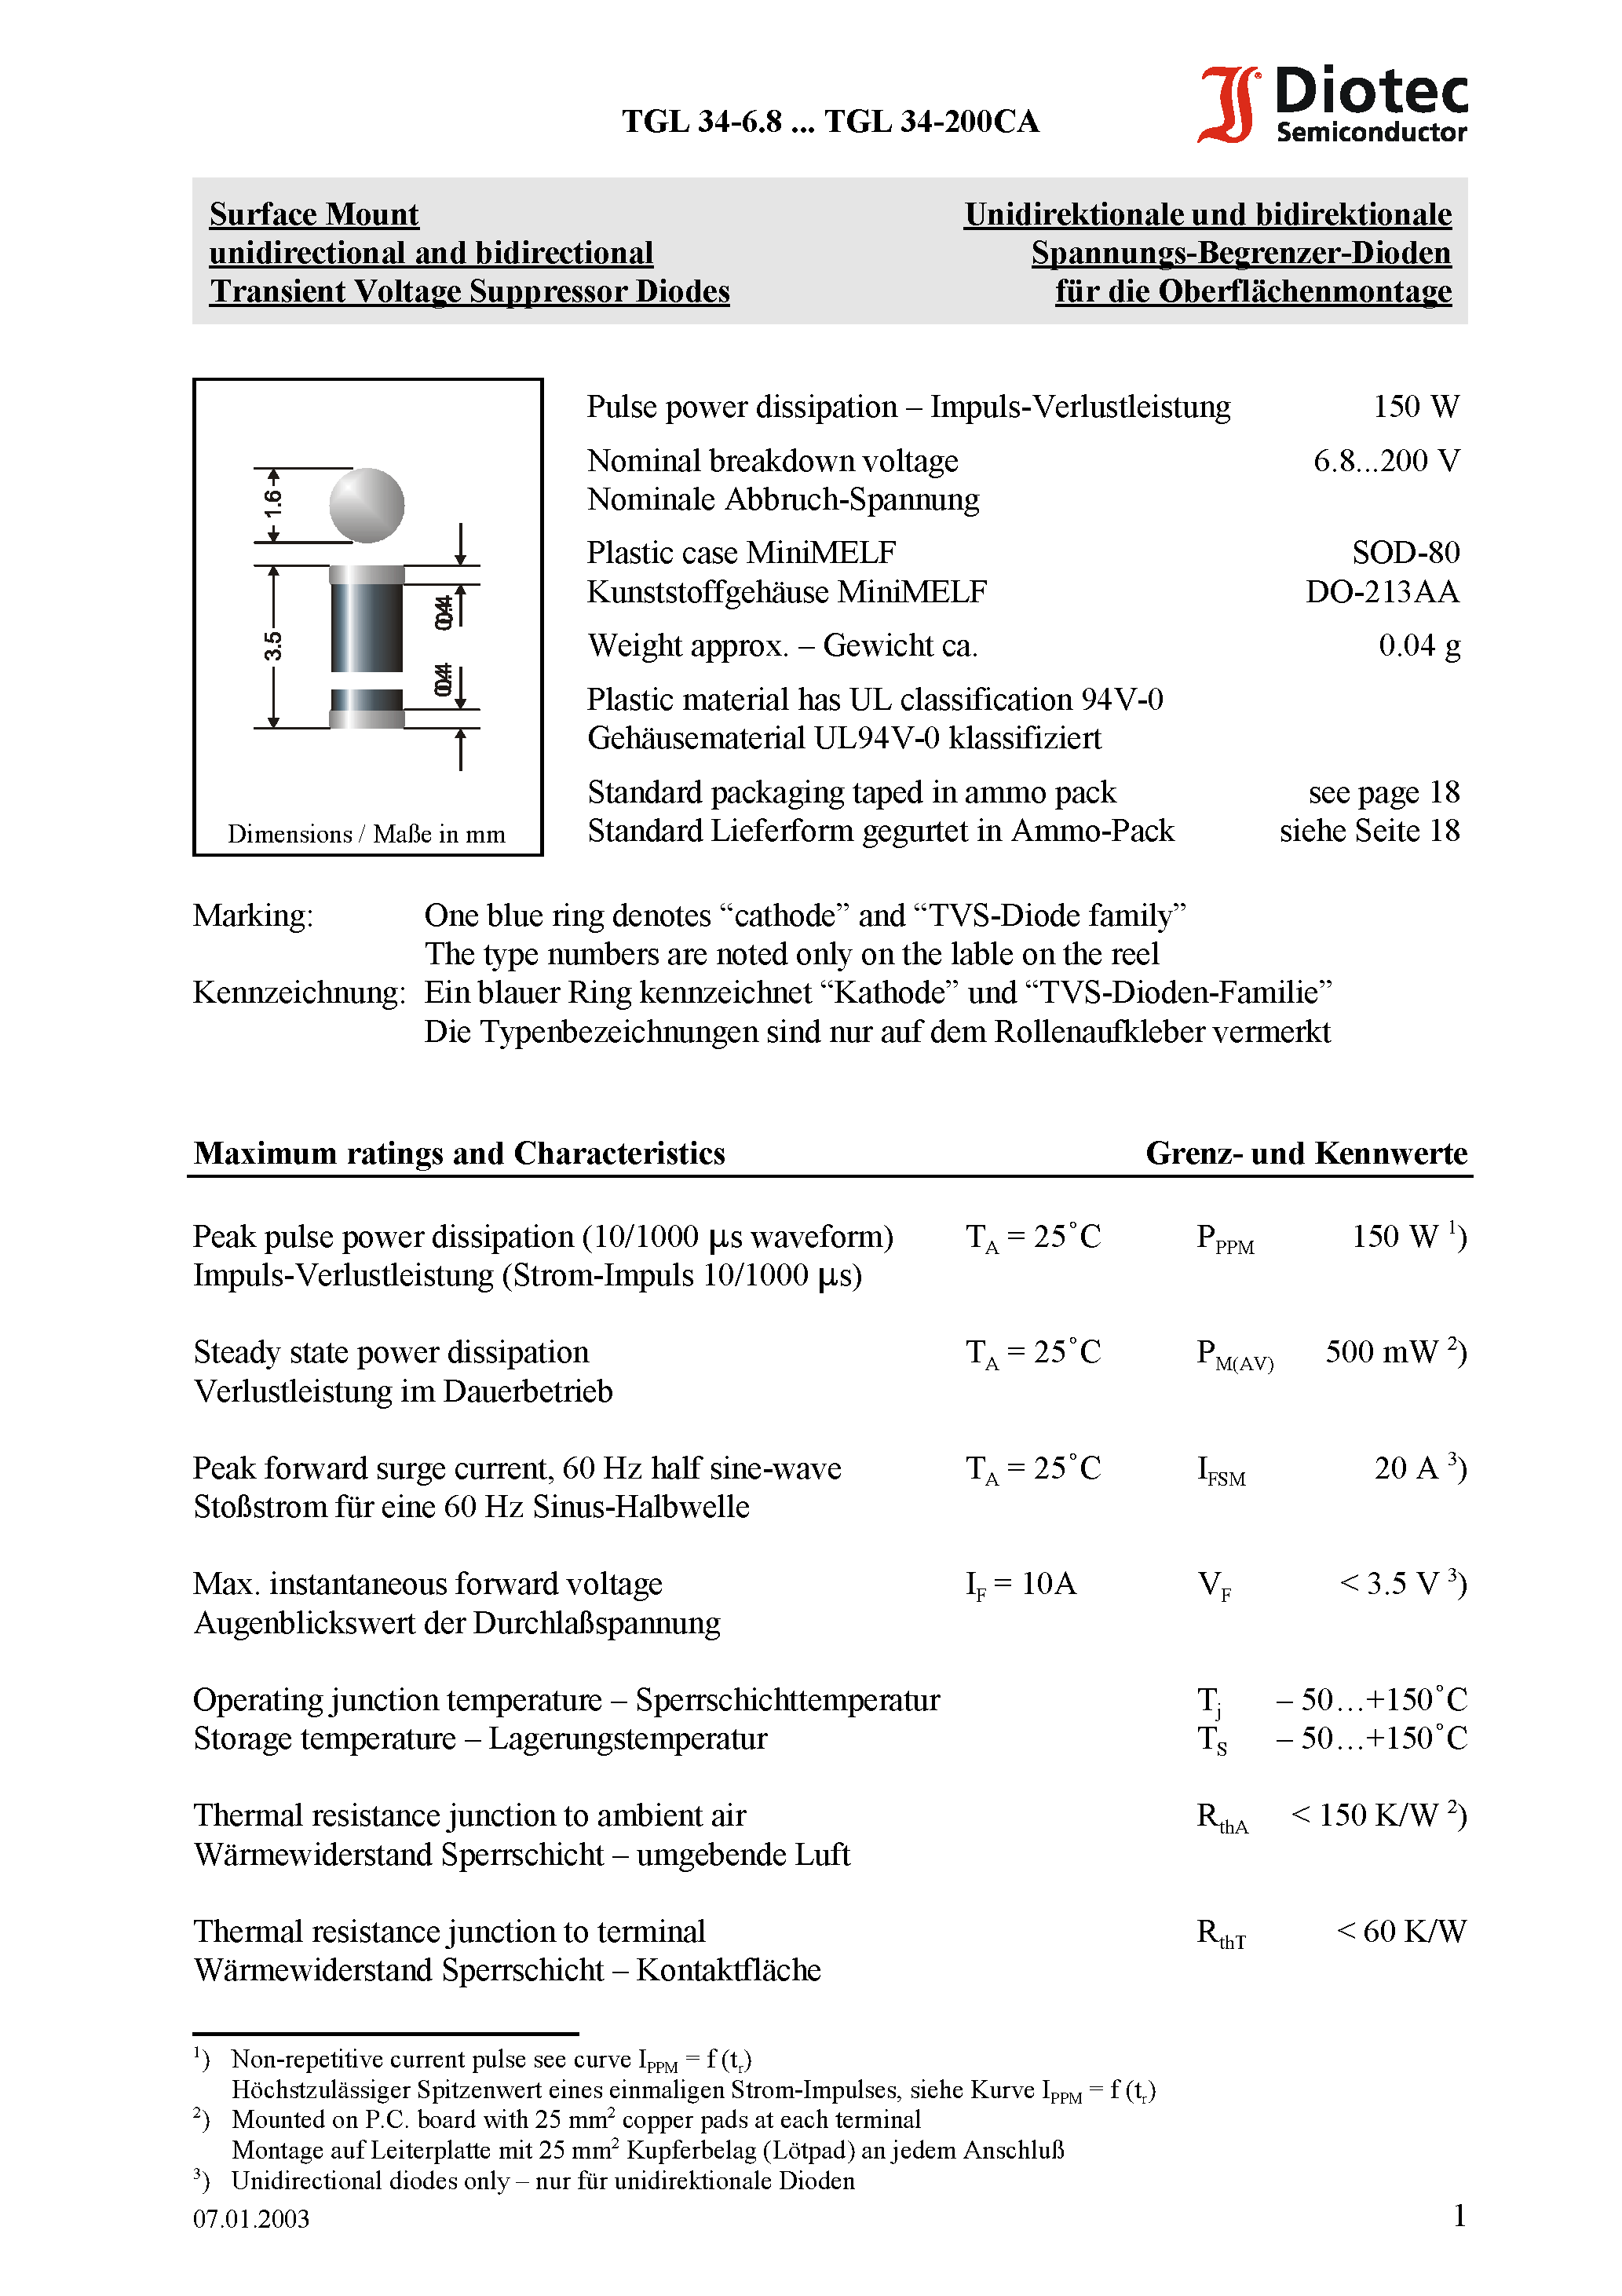 Datasheet TGL34-9.1A - Surface Mount unidirectional and bidirectional Transient Voltage Suppressor Diodes page 1